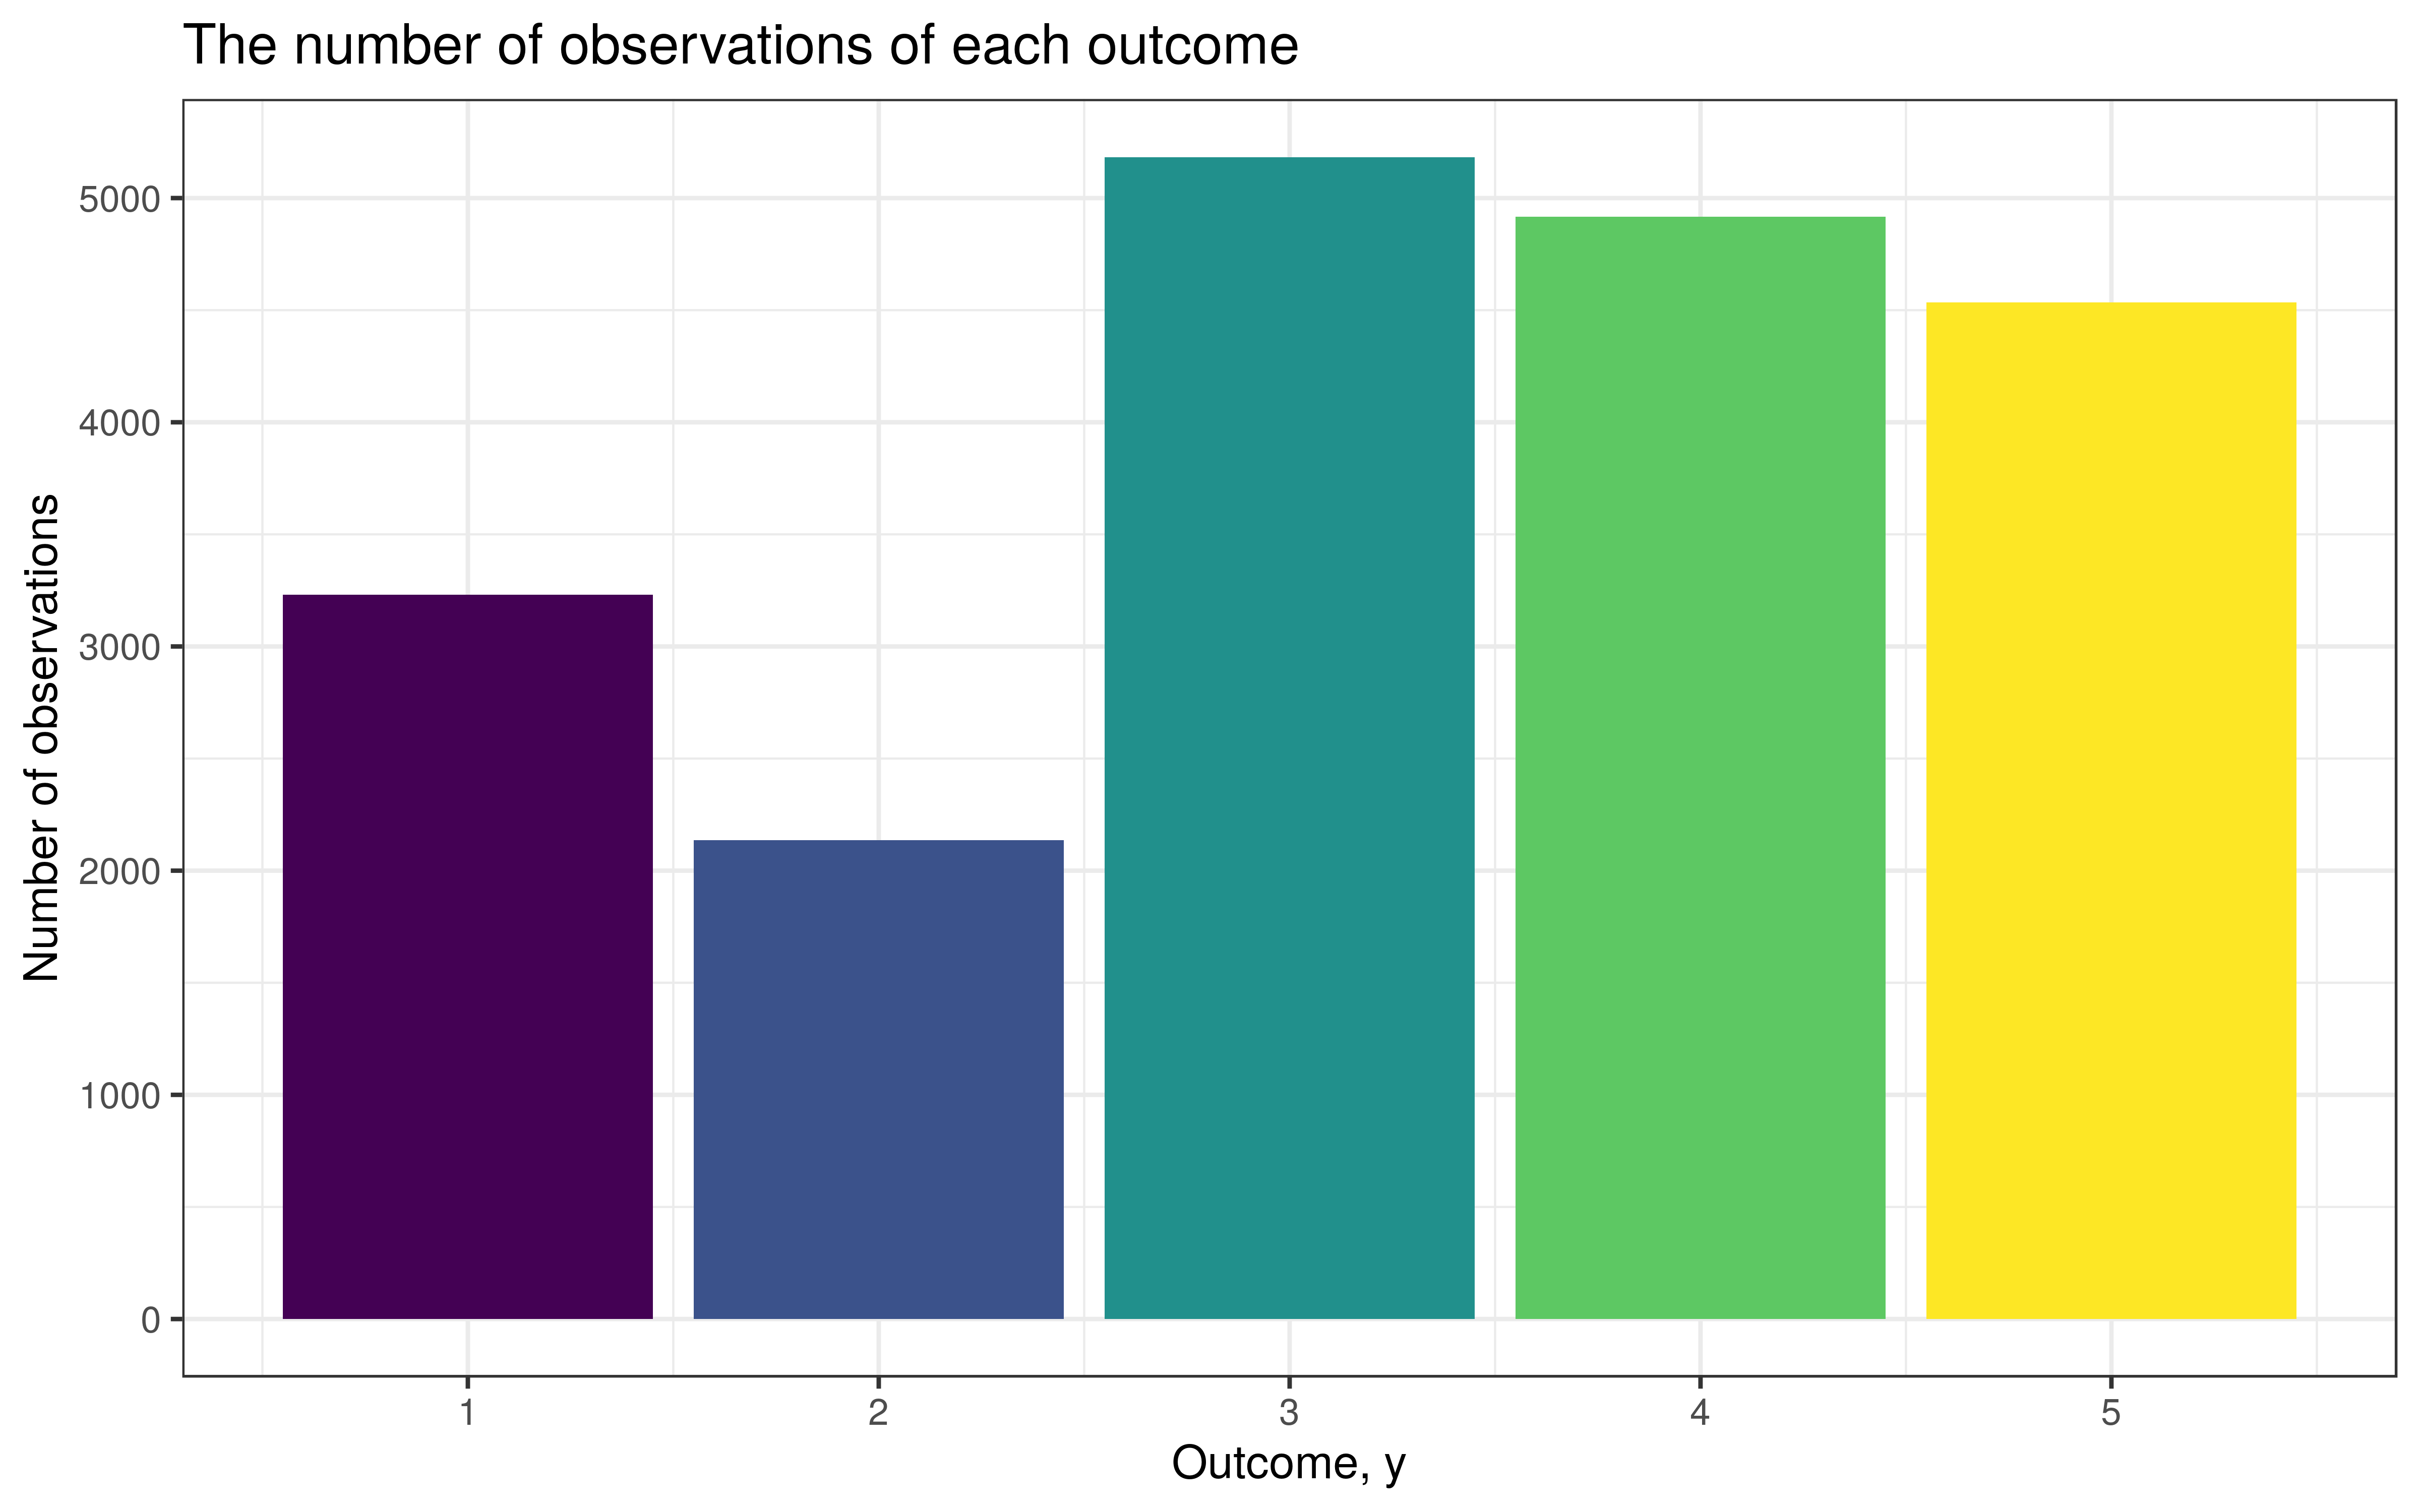 Counts of each outcome variable